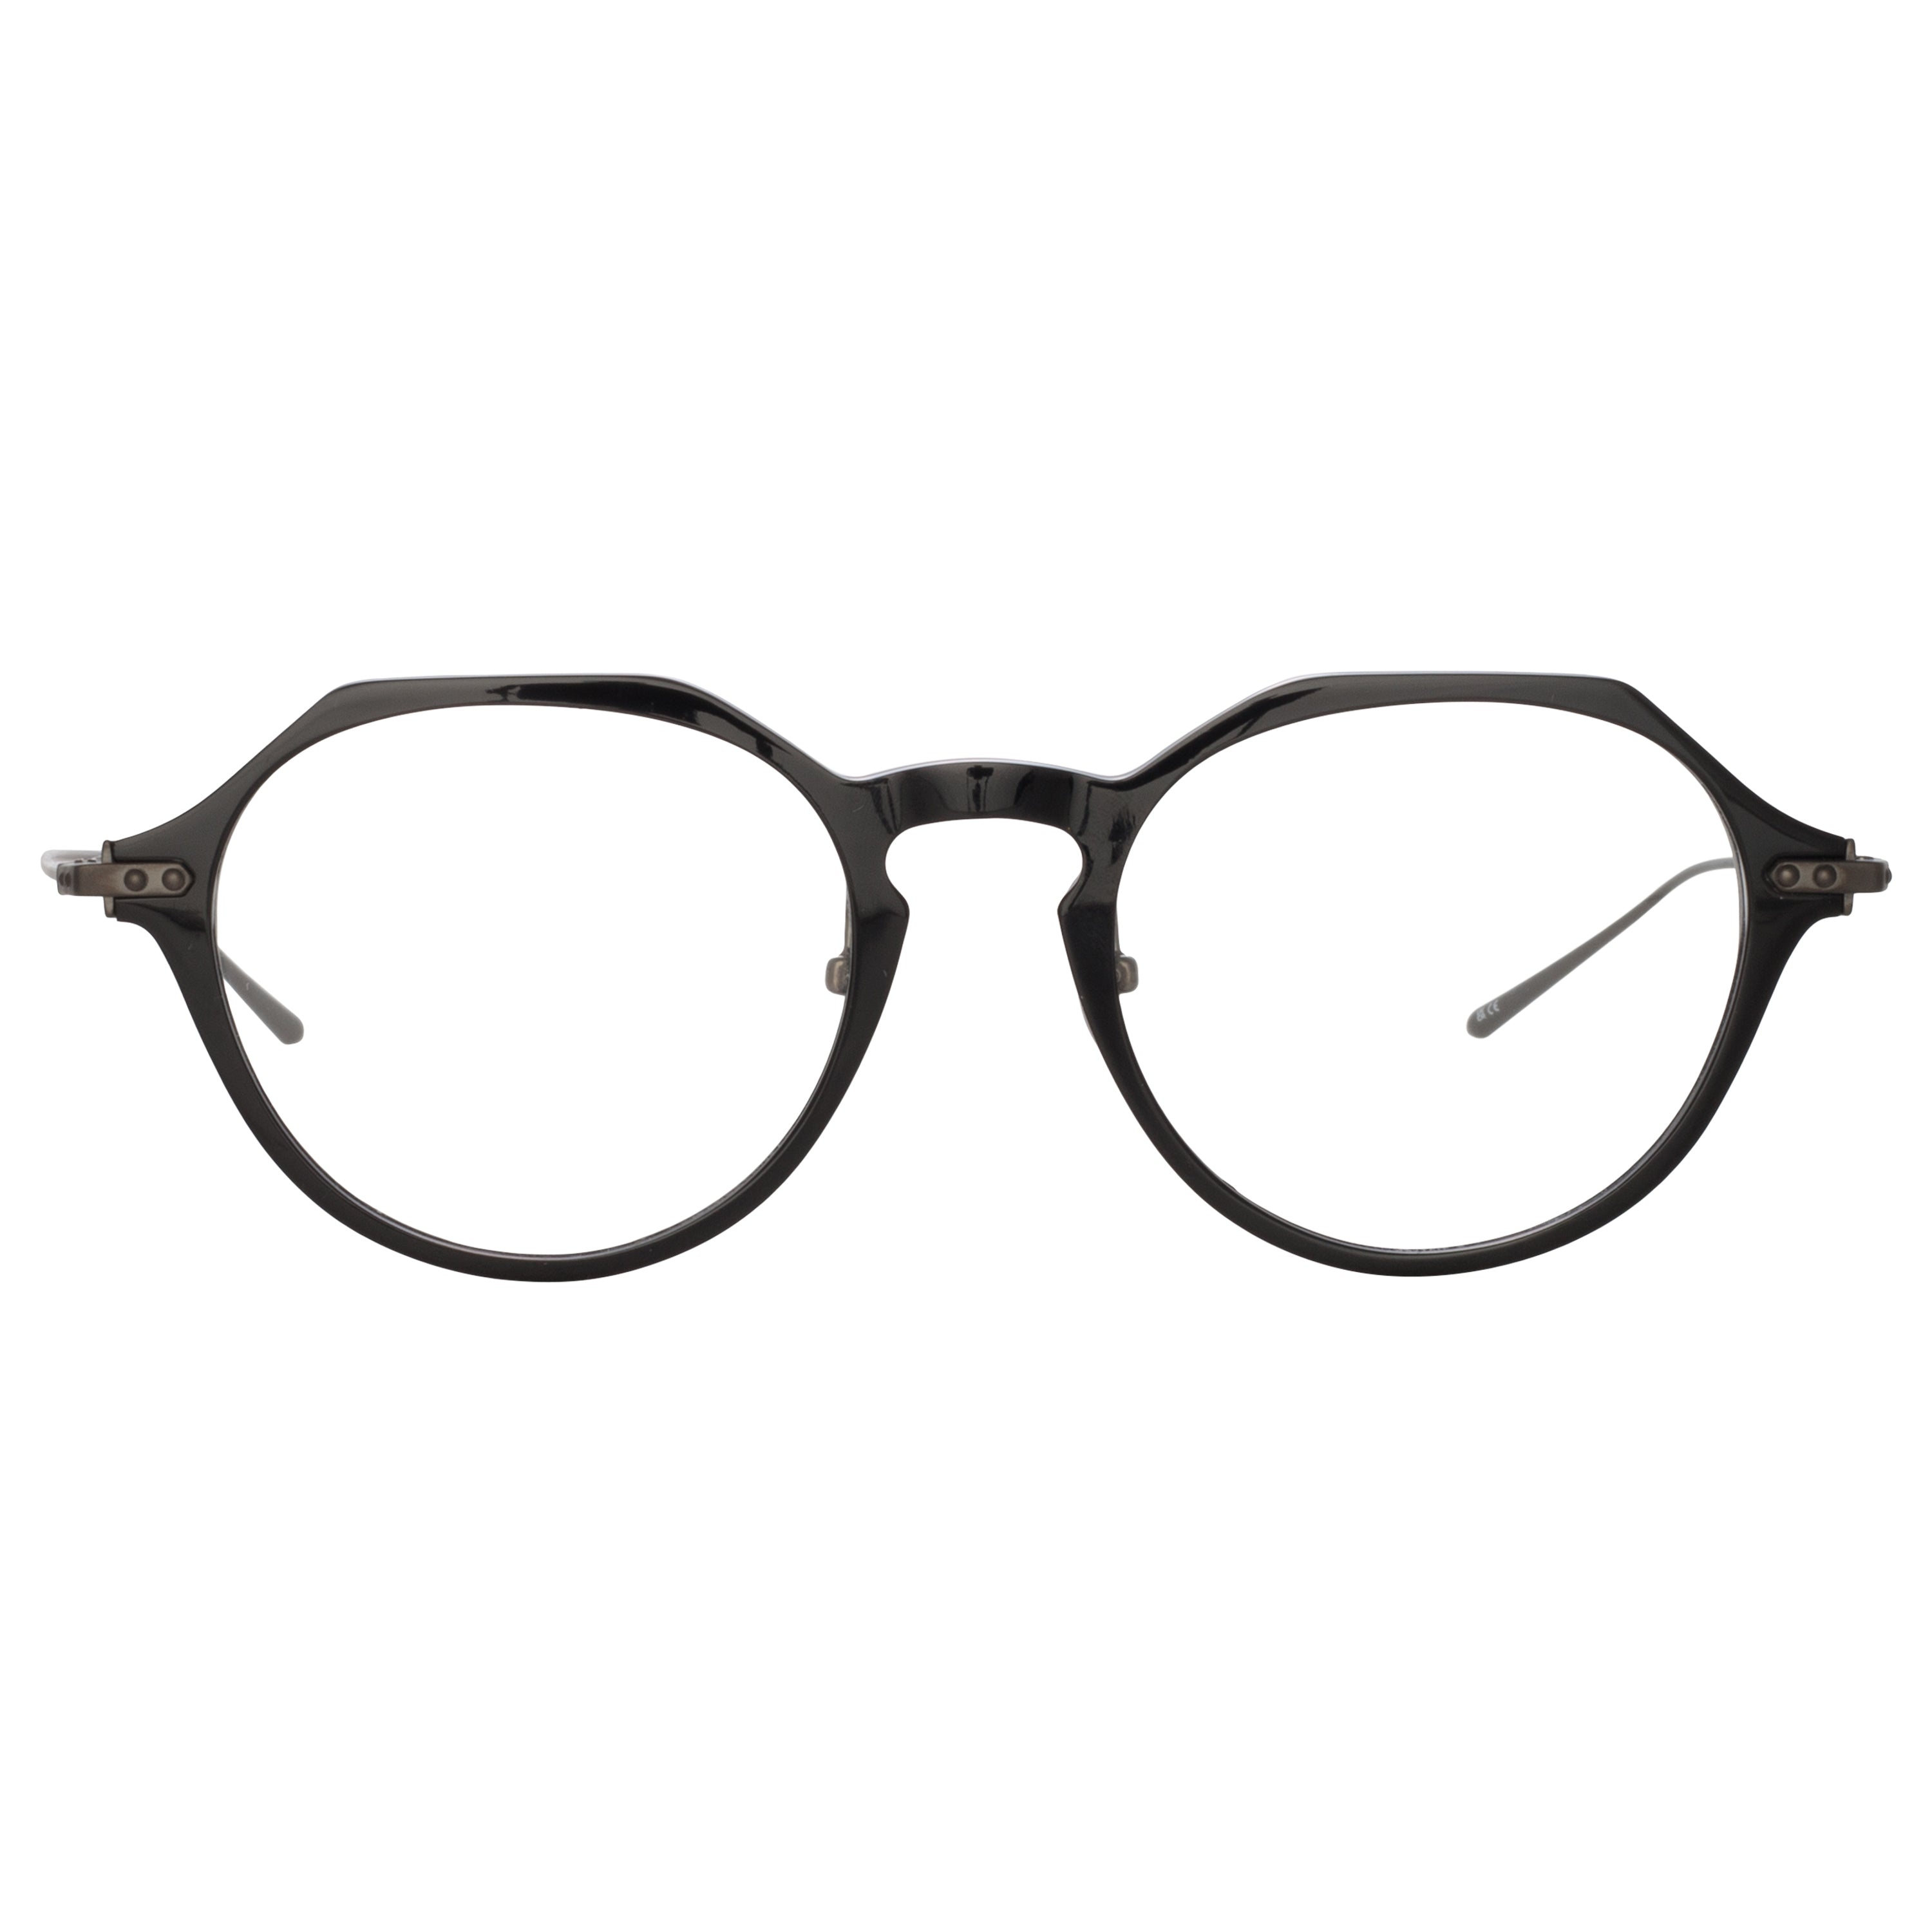 WREN OVAL OPTICAL A FRAME IN BLACK AND NICKEL - 2